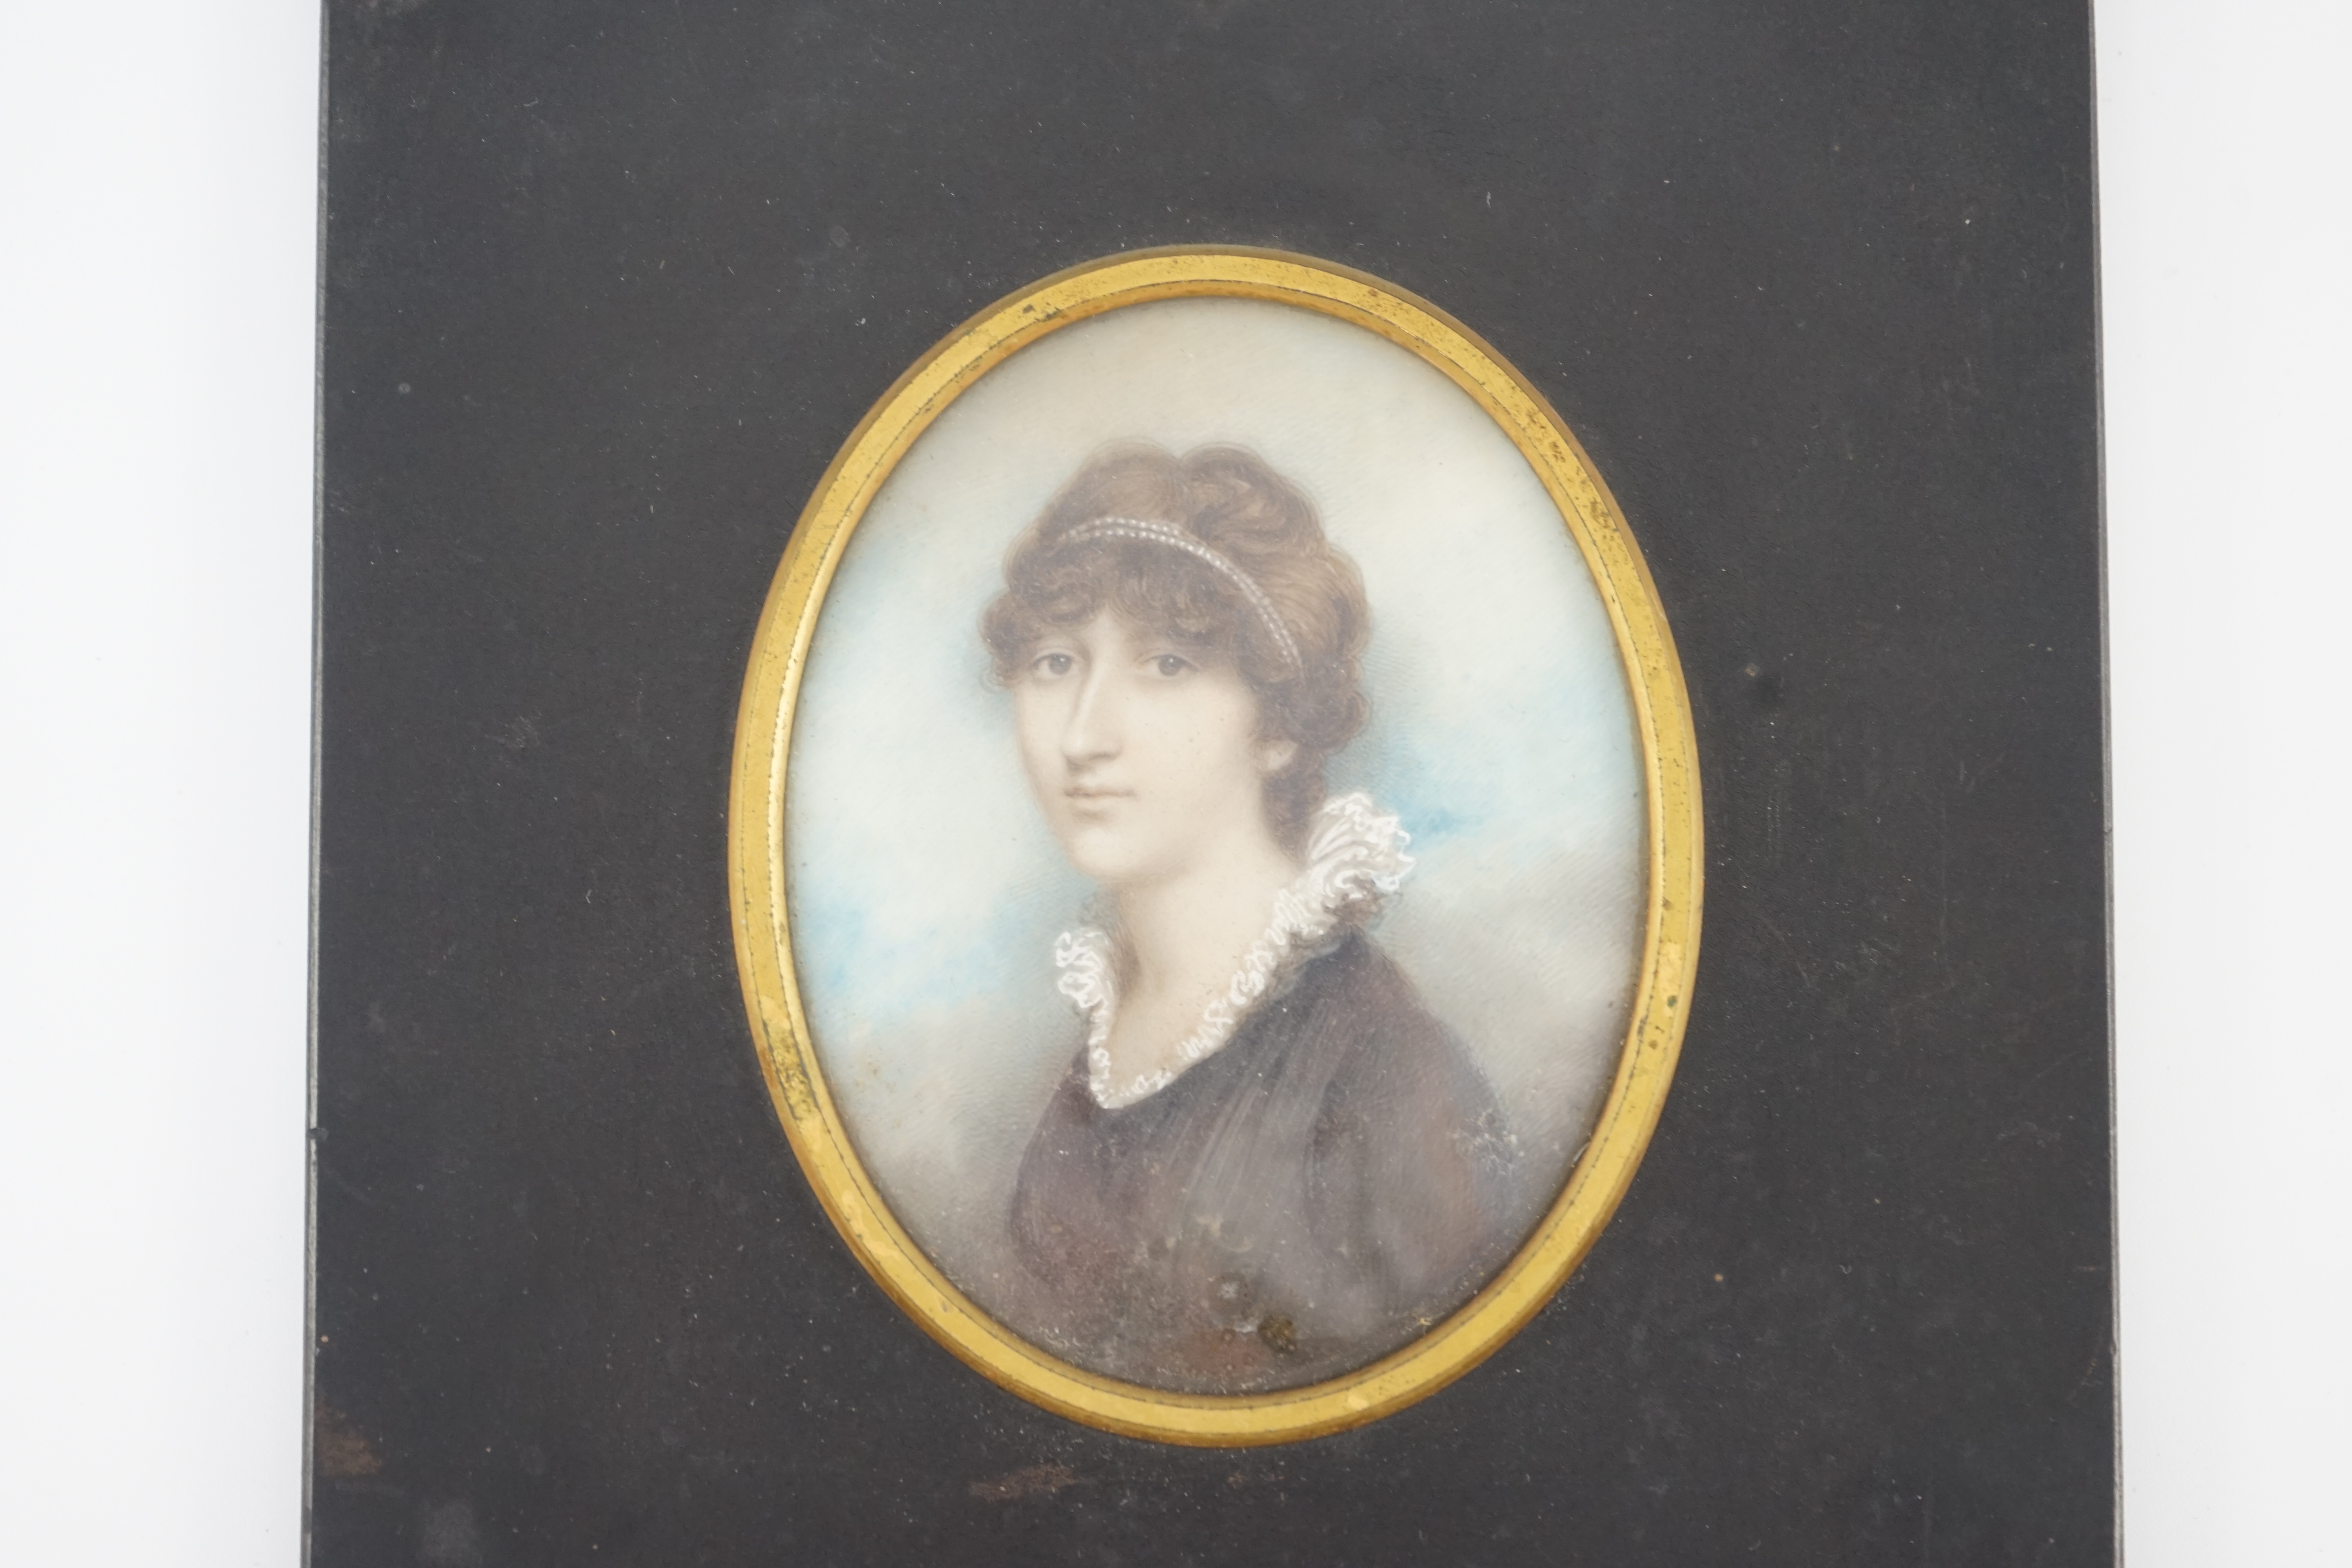 Andrew Plimer (1763-1837), Portrait miniature of a young lady, watercolour on ivory, 7.8 x 6cm. CITES Submission reference 8UB64CXM